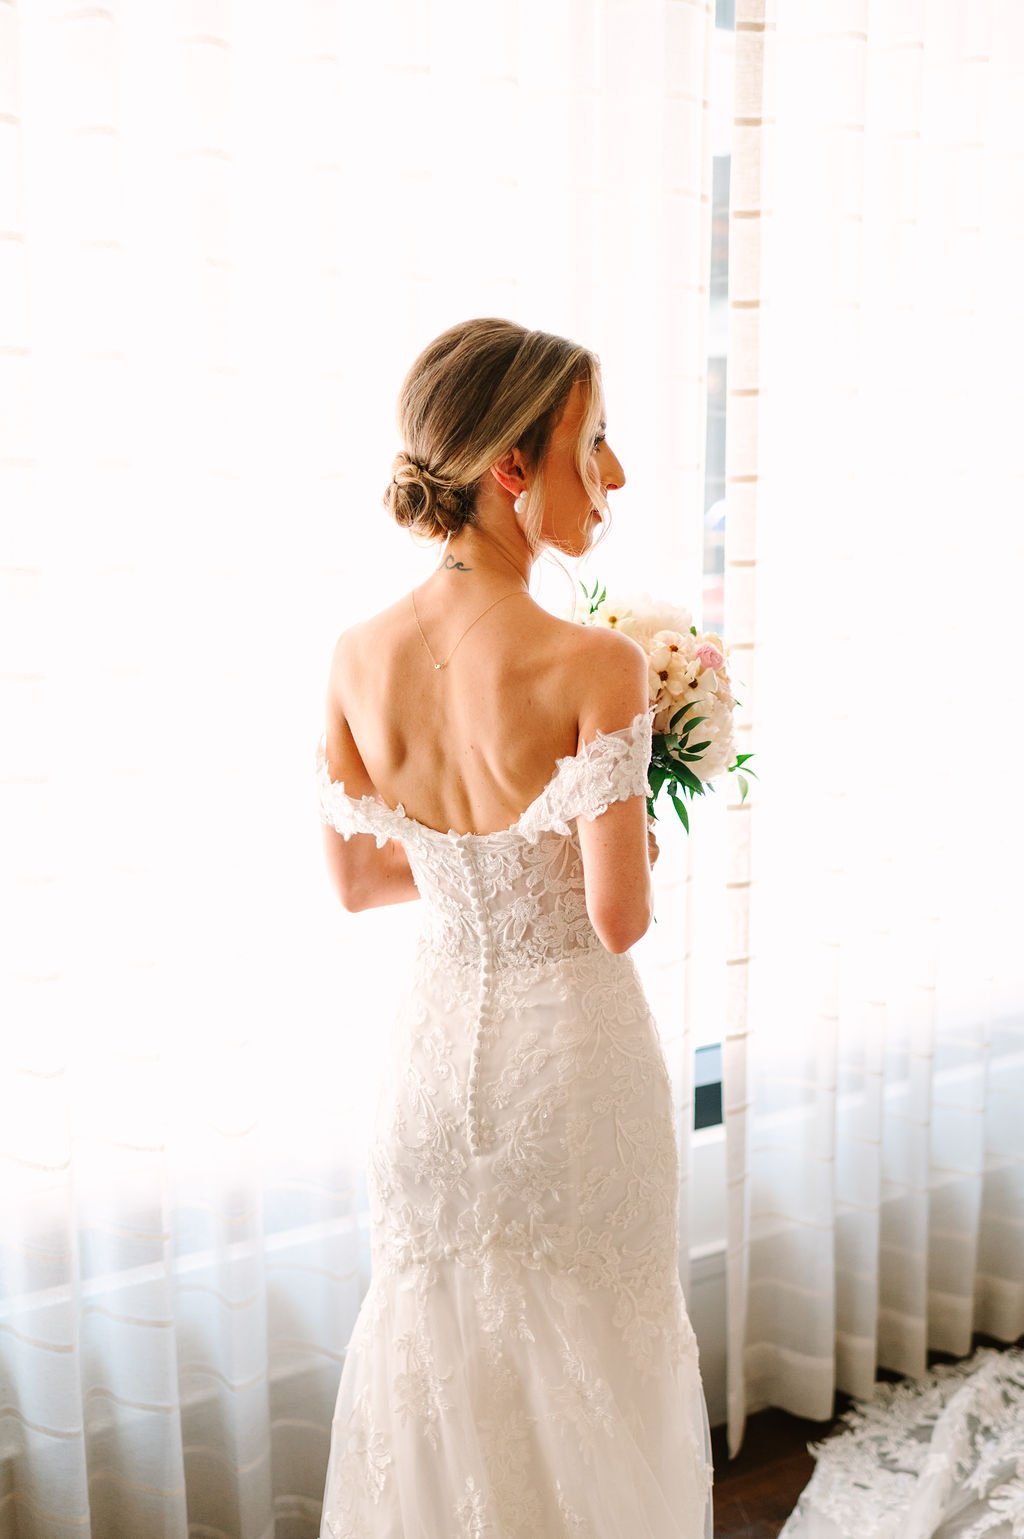 ivory-and-beau-bride-hayley-in-katell-by-maggie-sottero-a-clasic-fitted-lace-wedding-dress-with-sweetheart-neckline-purchased-from-savannah-bridal-shop-ivory-and-beau-9.jpg